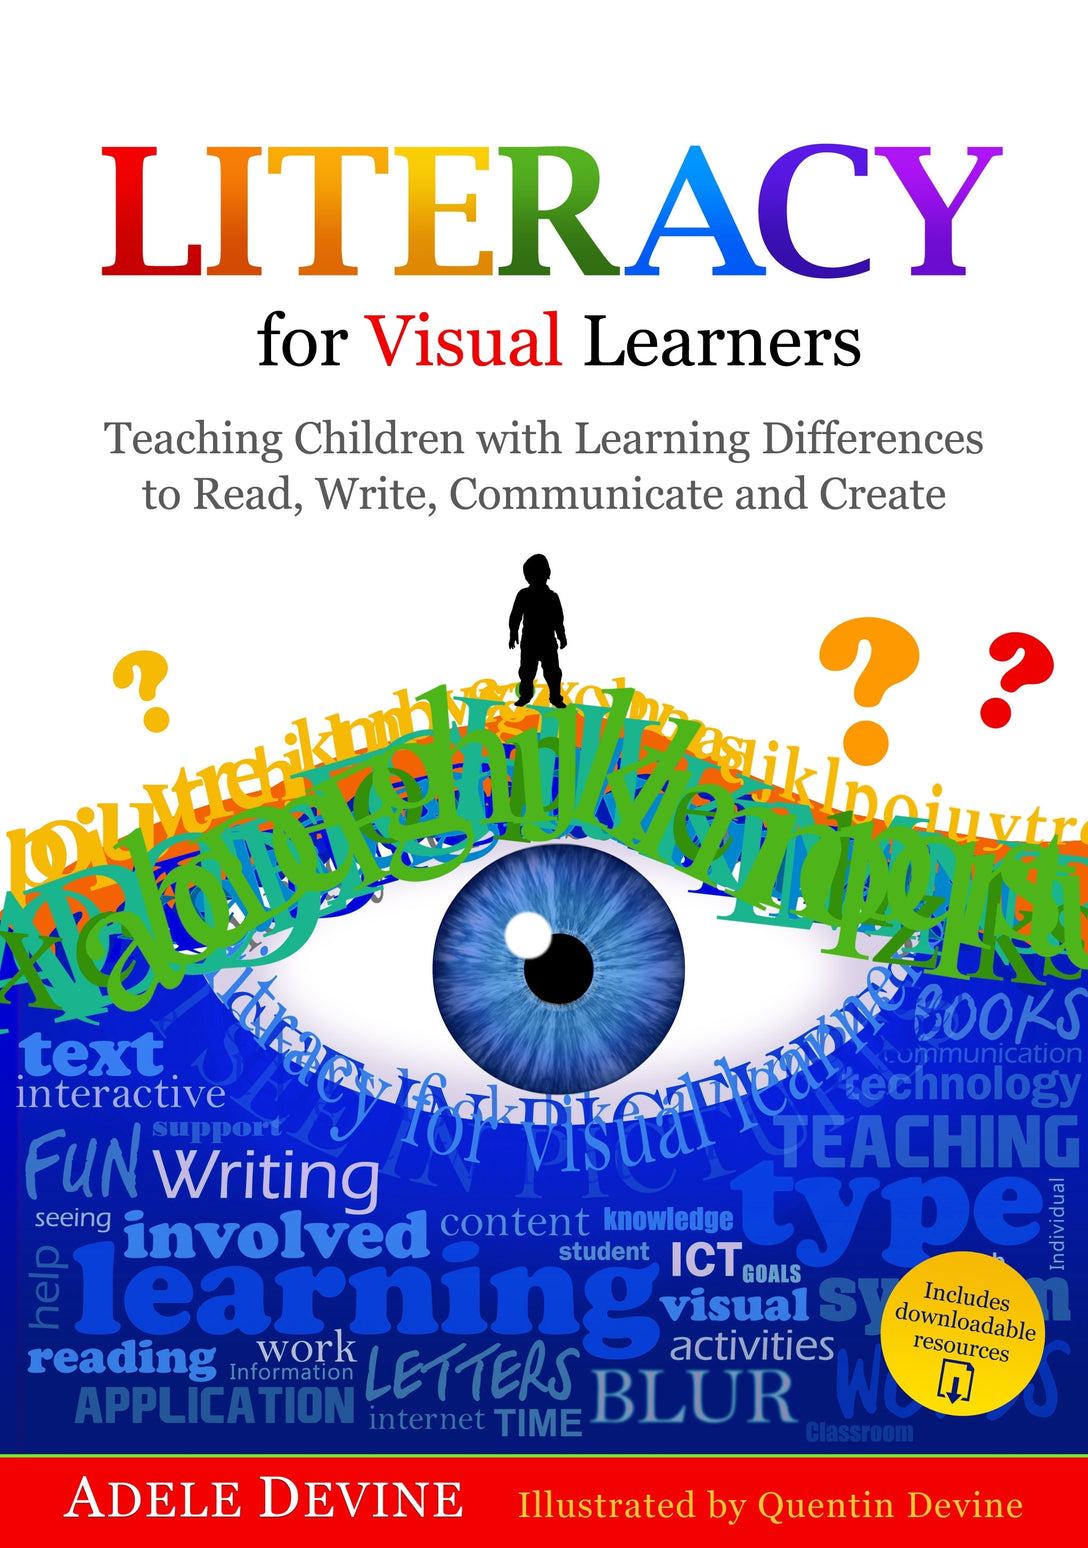 Literacy for Visual Learners by Quentin Devine, Adele Devine